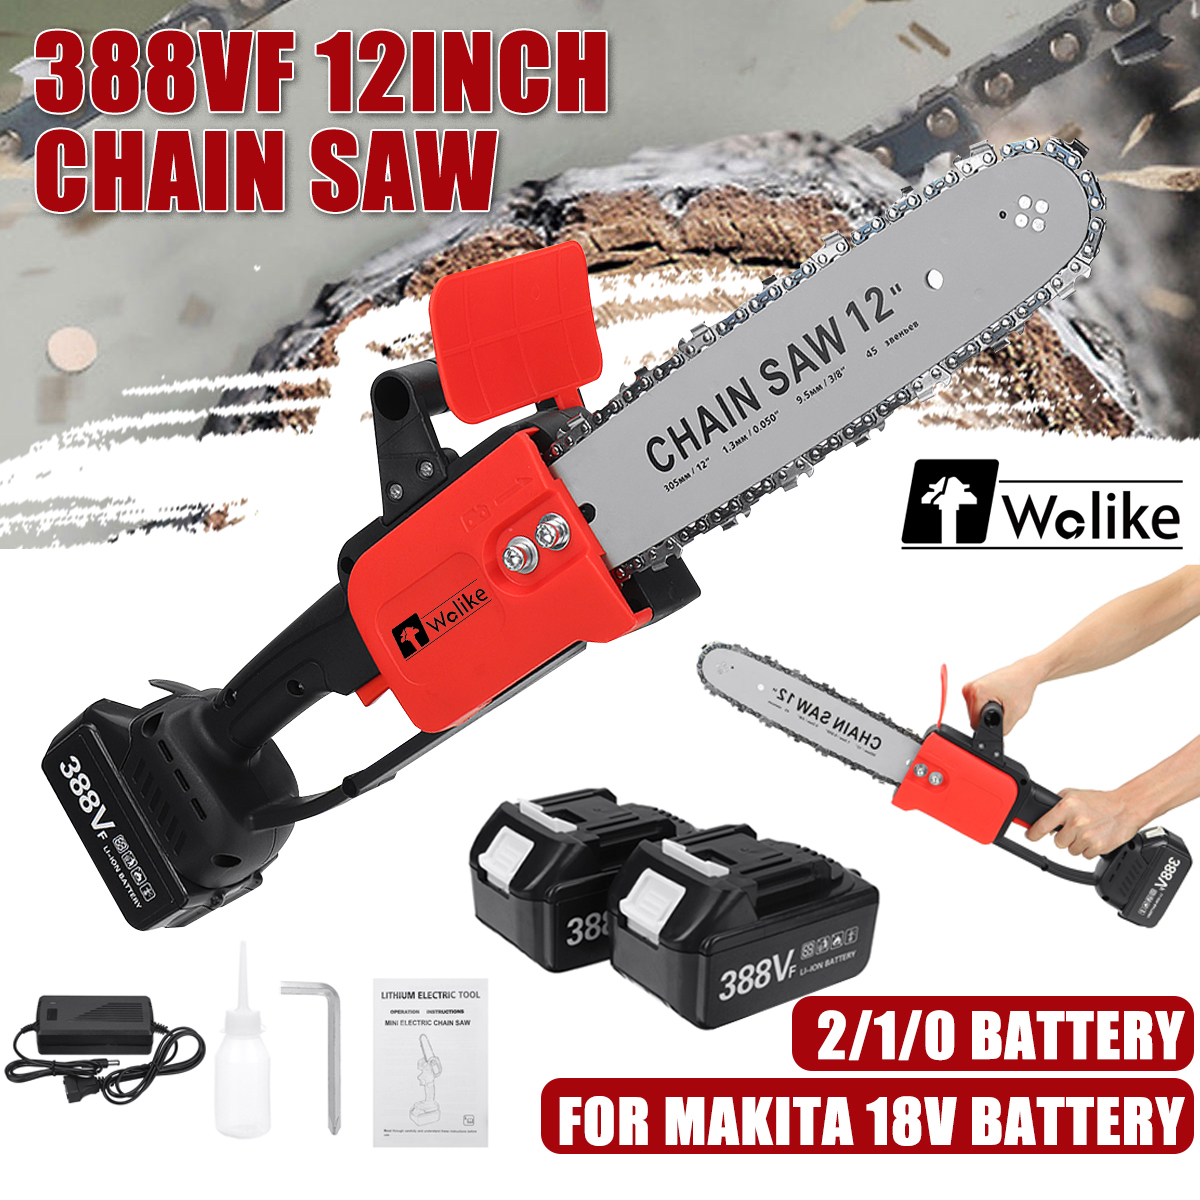 12-Inches-388VF-Cordless-Electric-One-Hand-Saw-Chain-Saw-Woodworking-Cutting-Tools-1903757-1